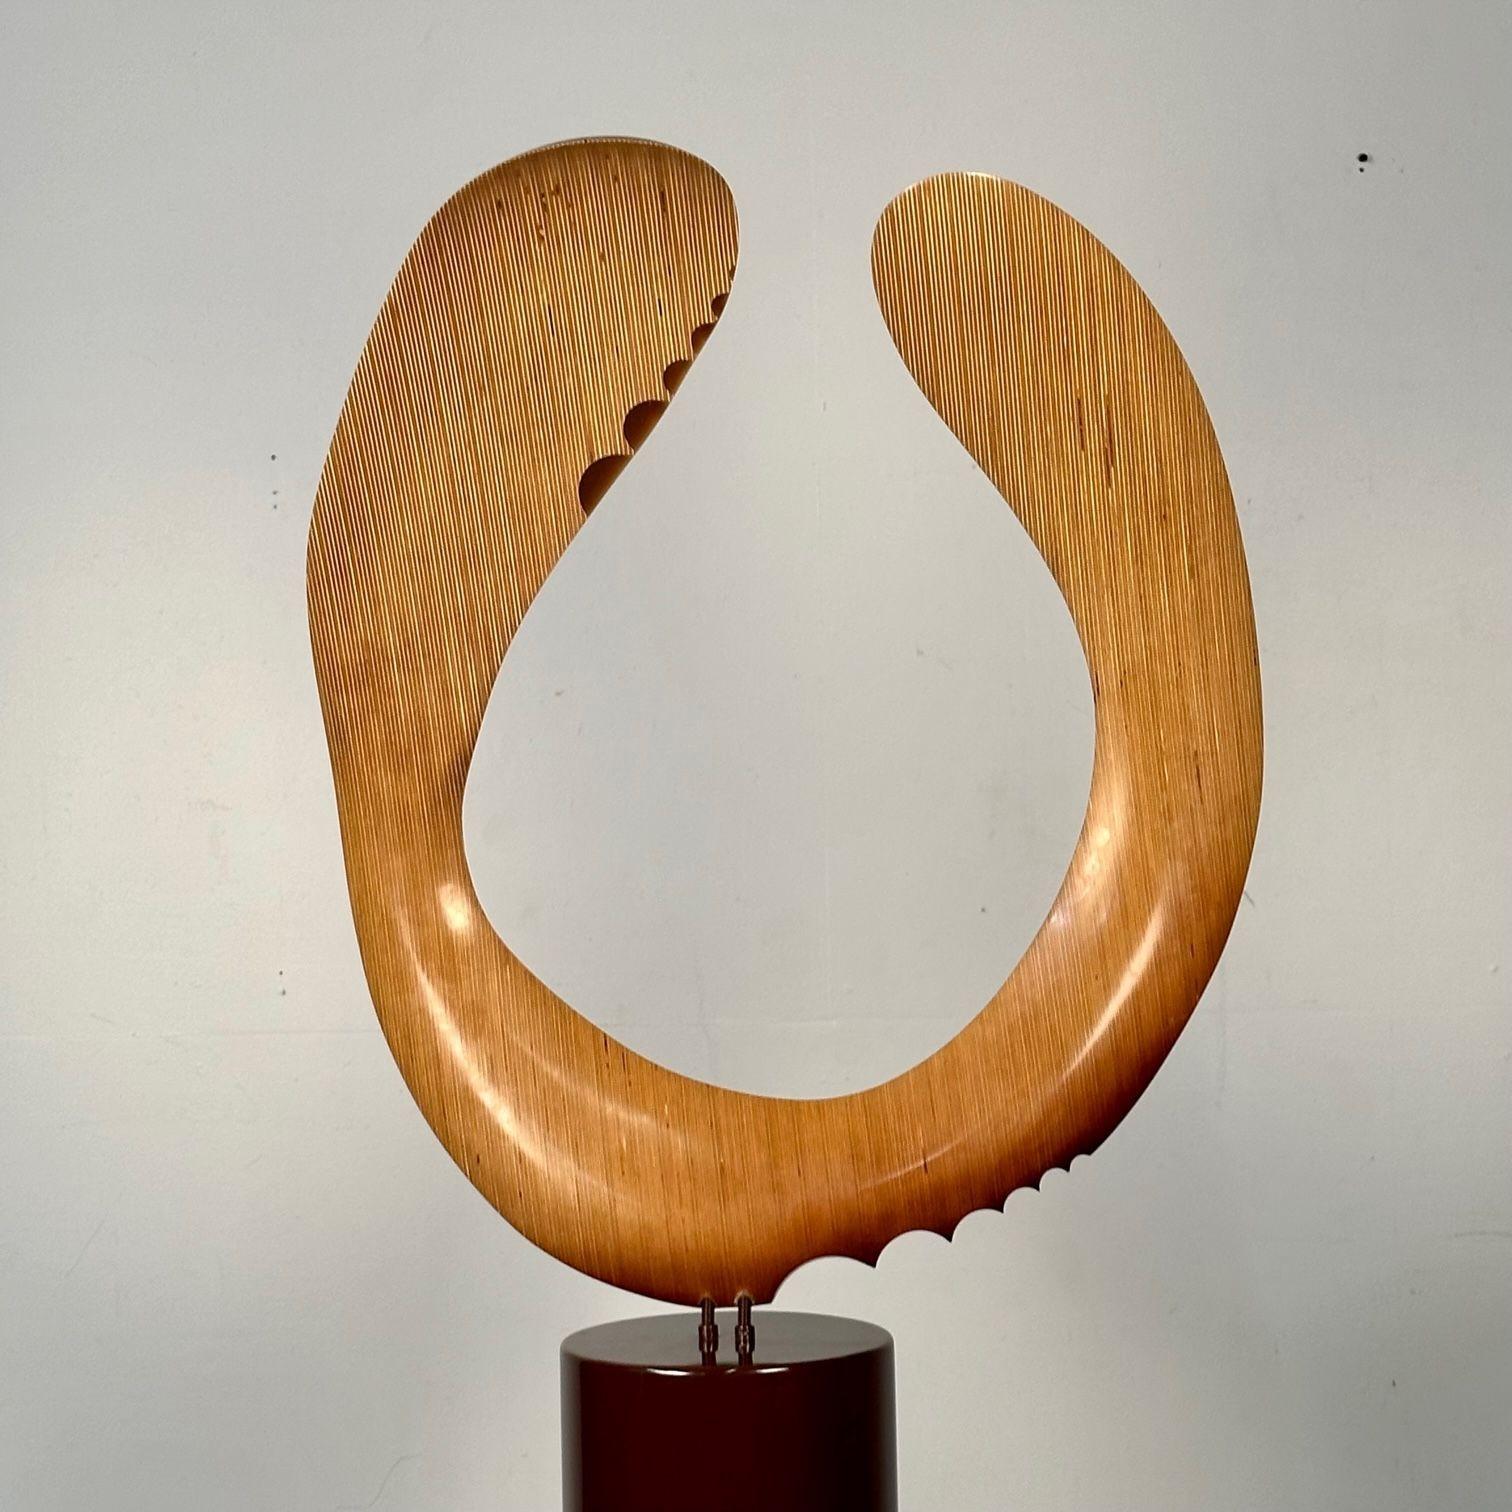  David Hymes, Contemporary, Boomerang Sculpture, Plywood, Steel Pedestal, 2010s For Sale 2